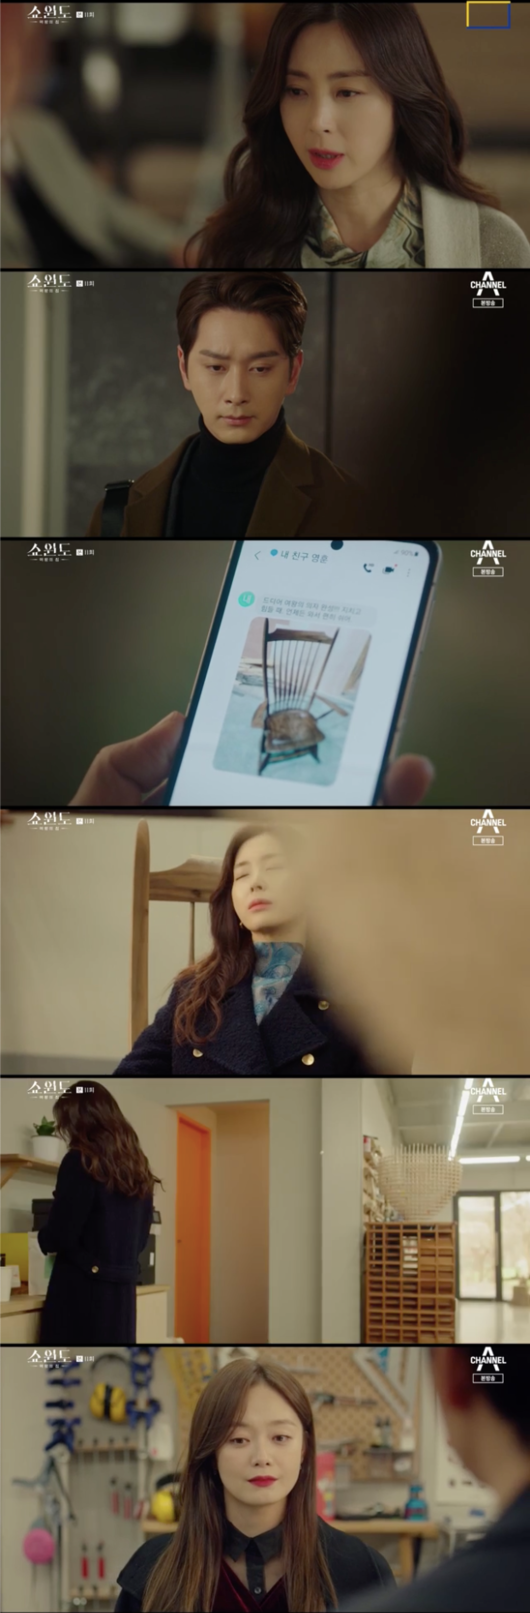 Showwindow: The Queens House Han Sun-ju was shocked to learn about Kim Seung-soo and Jeon So-mins Confidential Assignment.In the drama Showwindo: The Queens House (playplayplay by Han Bo-kyung, Park Hye-young / Director Kangsol, and Park Dae-hee), which was broadcasted at 10:30 on the 3rd, the figure of Younghoon (Kim Seung-soo), which reveals Blow-Up about Han Sun-joo (Song Yoon-ah), was broadcast.On that day, Han Seon-ju visited Han Jung-wons house and told Han Jung-won, who left work, Lets talk about it.However, he was with Shin Myung-seop and Han Sun-ju, who saw it, said, I was misunderstood a lot.I thought you were my brother who was no different from Eunju, but you were not. He said, I do not care what I do to me.But I can not forgive you for being a mother. Han Seon-ju tried to laugh at the text of Friend Cha Younghoons Finally completing Queens chair, come and rest whenever you are tired.Han Seon-ju found a tea studio and relaxed in his chair, but Yoon Mi-ra came into the studio and had a quarrel with Younghoon.I would have warned you not to do anything you did not, said Yun Mi-ra. I am not a marionette doll.It is not a scarecrow that does not say that you should do it. If this is the case, I can not help you, said Younghoon, help me? You? You used me to have a ship.You asked Han Jung-won to approach it. Youre the one who scheduled the scandal. Now there is no Confidential Assignment with you. I will do whatever I want in the future.There is not a single thing that has happened with you and Confidential Assignment. It is not that there is nothing, but it seems that there is no change on the outside, but there is already a crack between Shin Myung-seop and Han Seon-ju, said Younghoon.The collapse of a huge dam starts with a small crack, he said.Han Seon-ju called Younghoon and said, Why did you do that? Was it you who gave me the hurt that I could not wash?My friend, Younghoon, did you do it? Yes its me, I did it, tea said, honestly responding to Han Sun-joo, who asked, Why did you do it? Because youre crying in front of me.I will not put you next to that scumbag, Shin Myung-seop, he said, revealing Blow-Up, saying, I will put you next to me. Han Seon-ju turned coldly, saying, Do not contact me again.[Photo] Channel A captures the screen of Showwindow: The Queens House